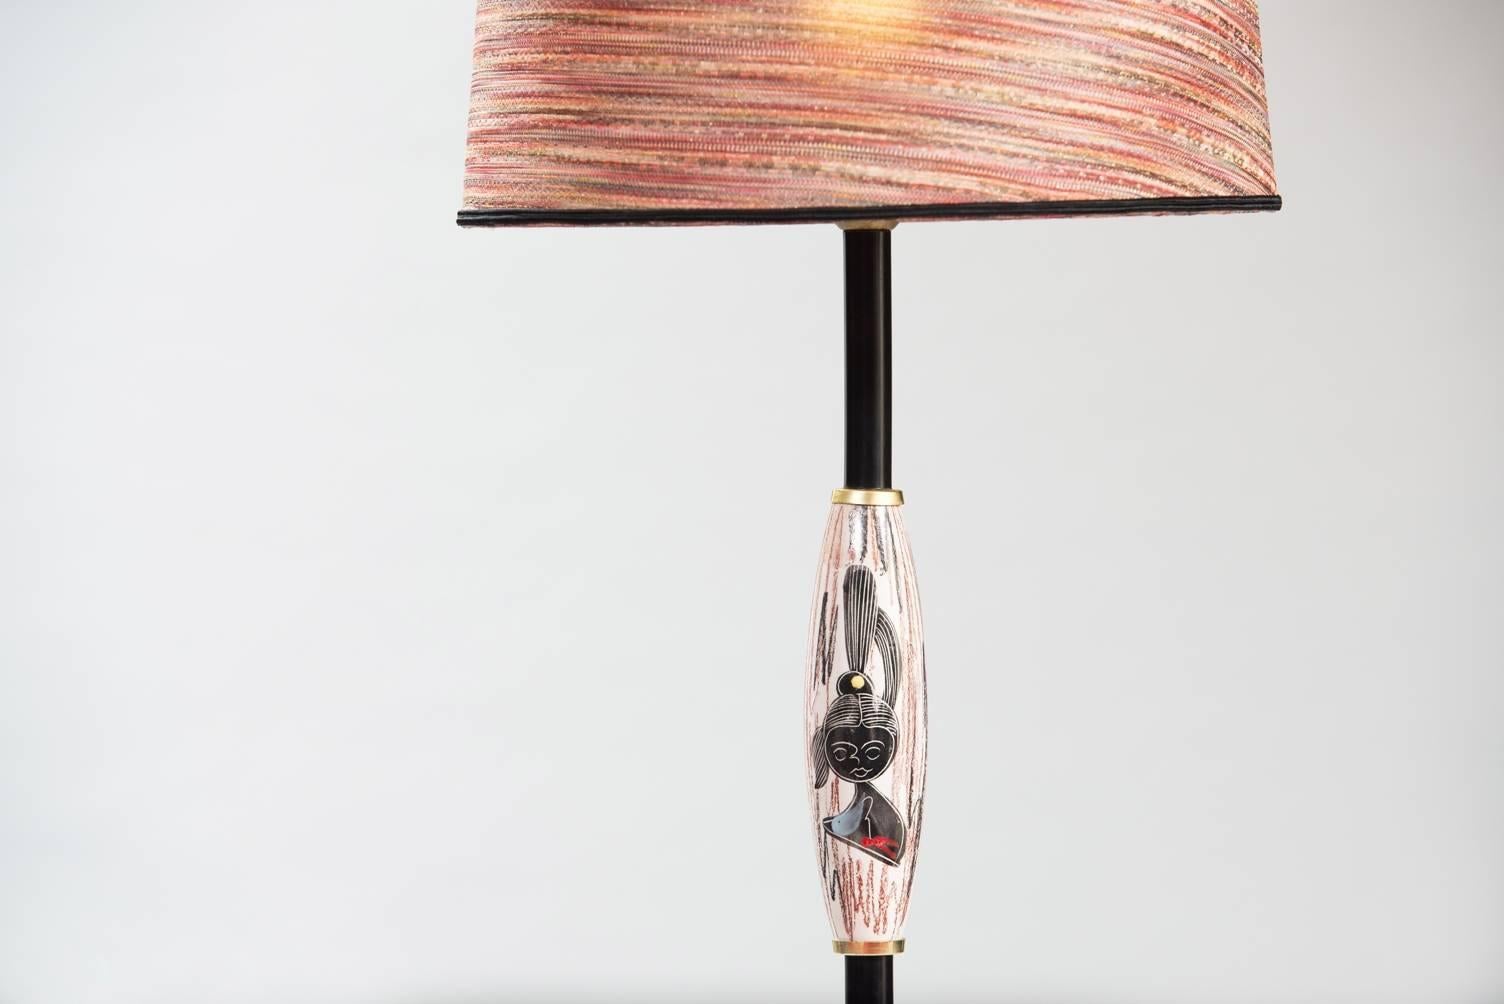 Floor lamp with painted ceramics, brass and black painted metal, new fabric shade.
Measures: H 172 cm, D 45 cm (shade).